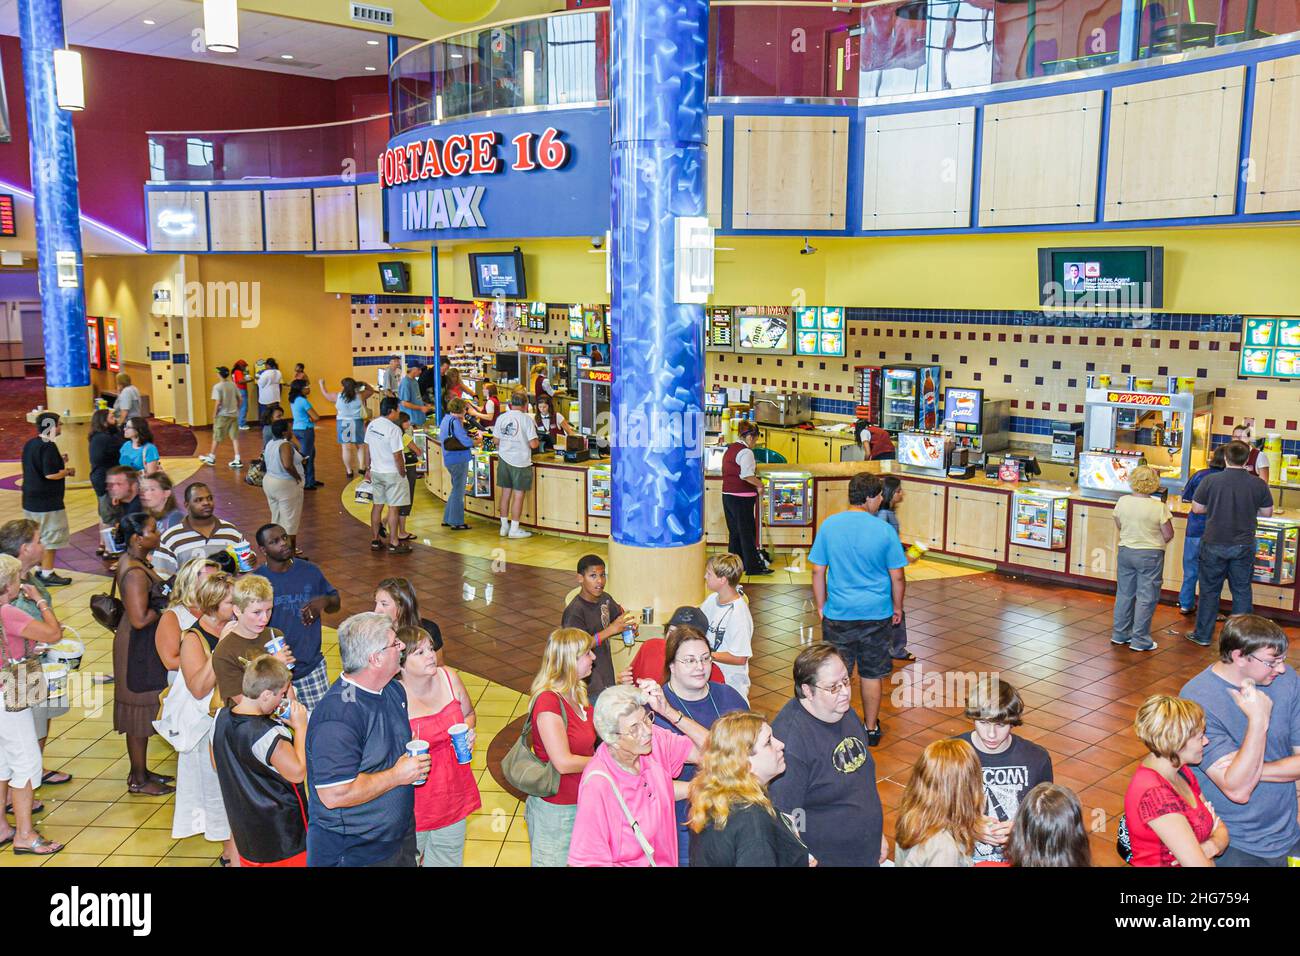 Indiana Portage 16 IMAX movie theater theatre complex lobby,ticket line overhead view food snacks family families entertainment,long line lines queue Stock Photo